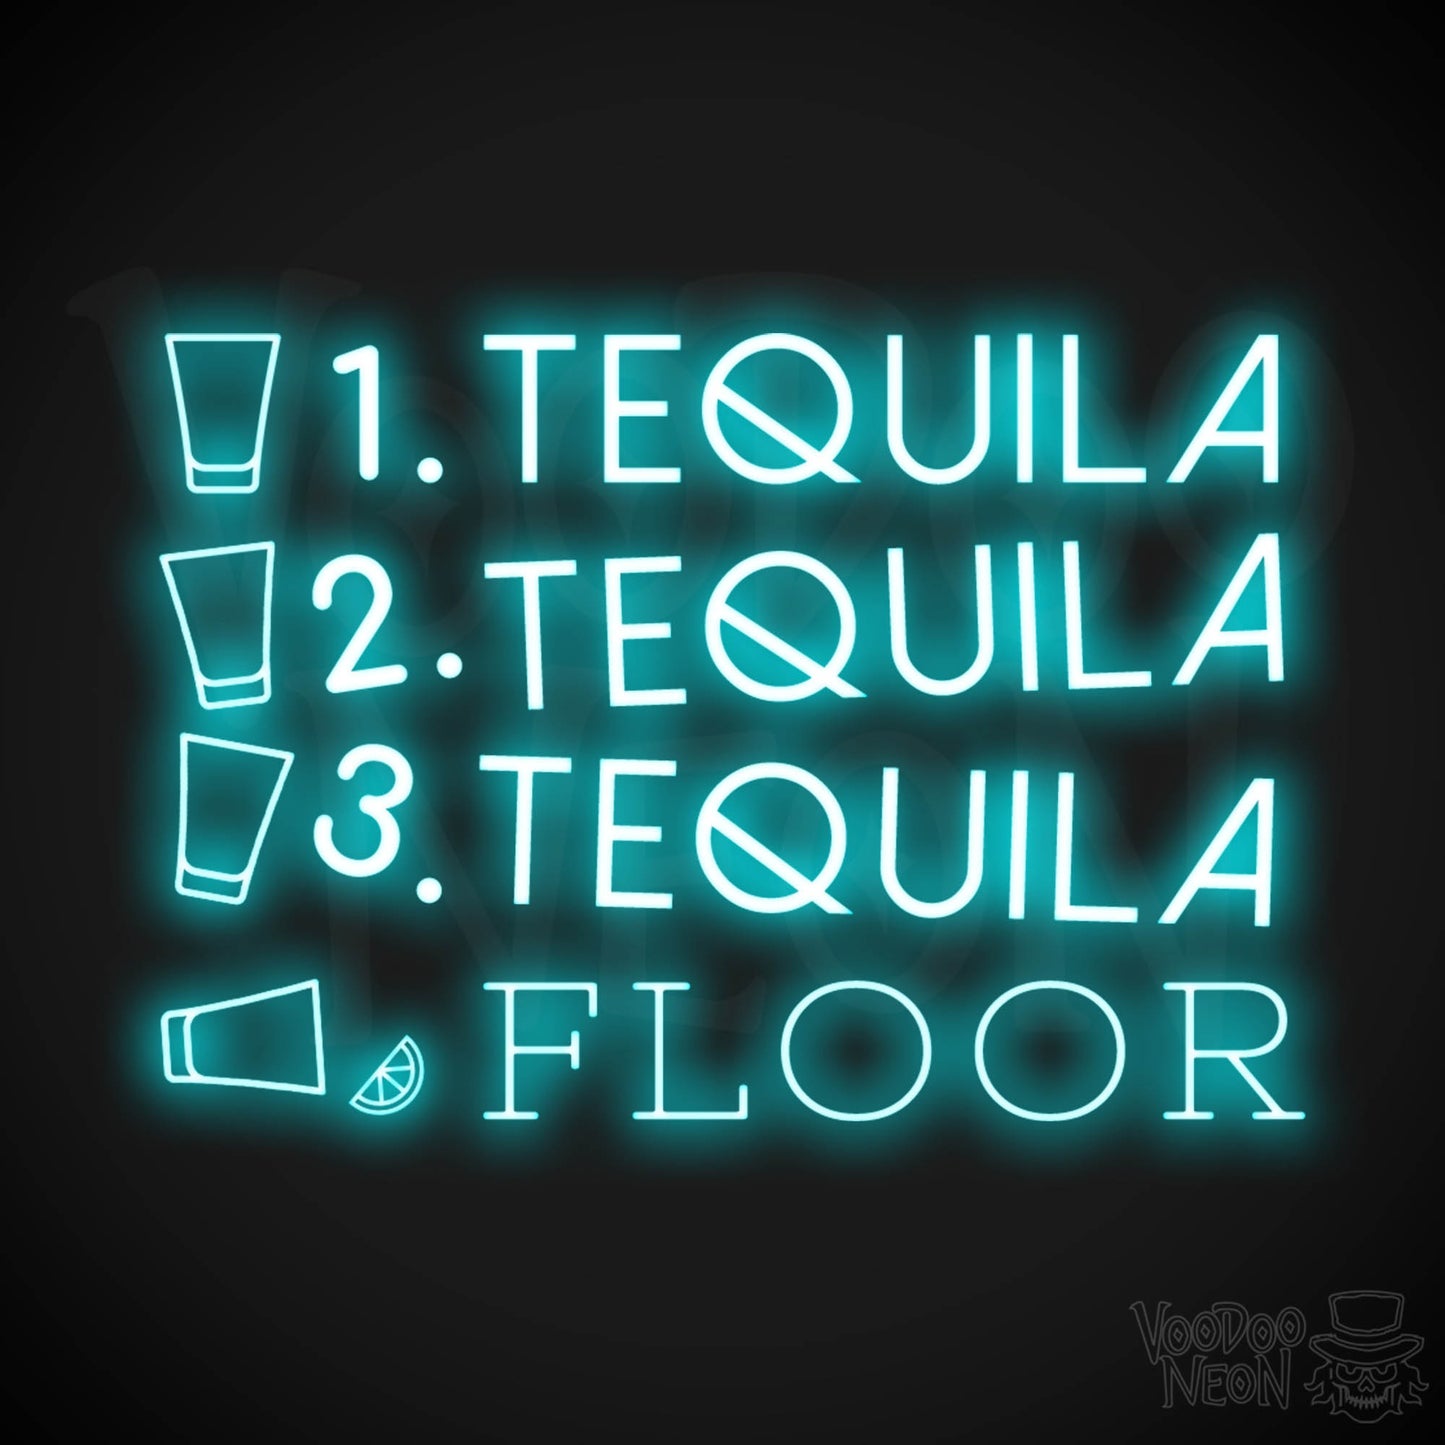 One Tequila Two Tequila Three Tequila Floor Neon sign - Neon Wall Art - Color Ice Blue